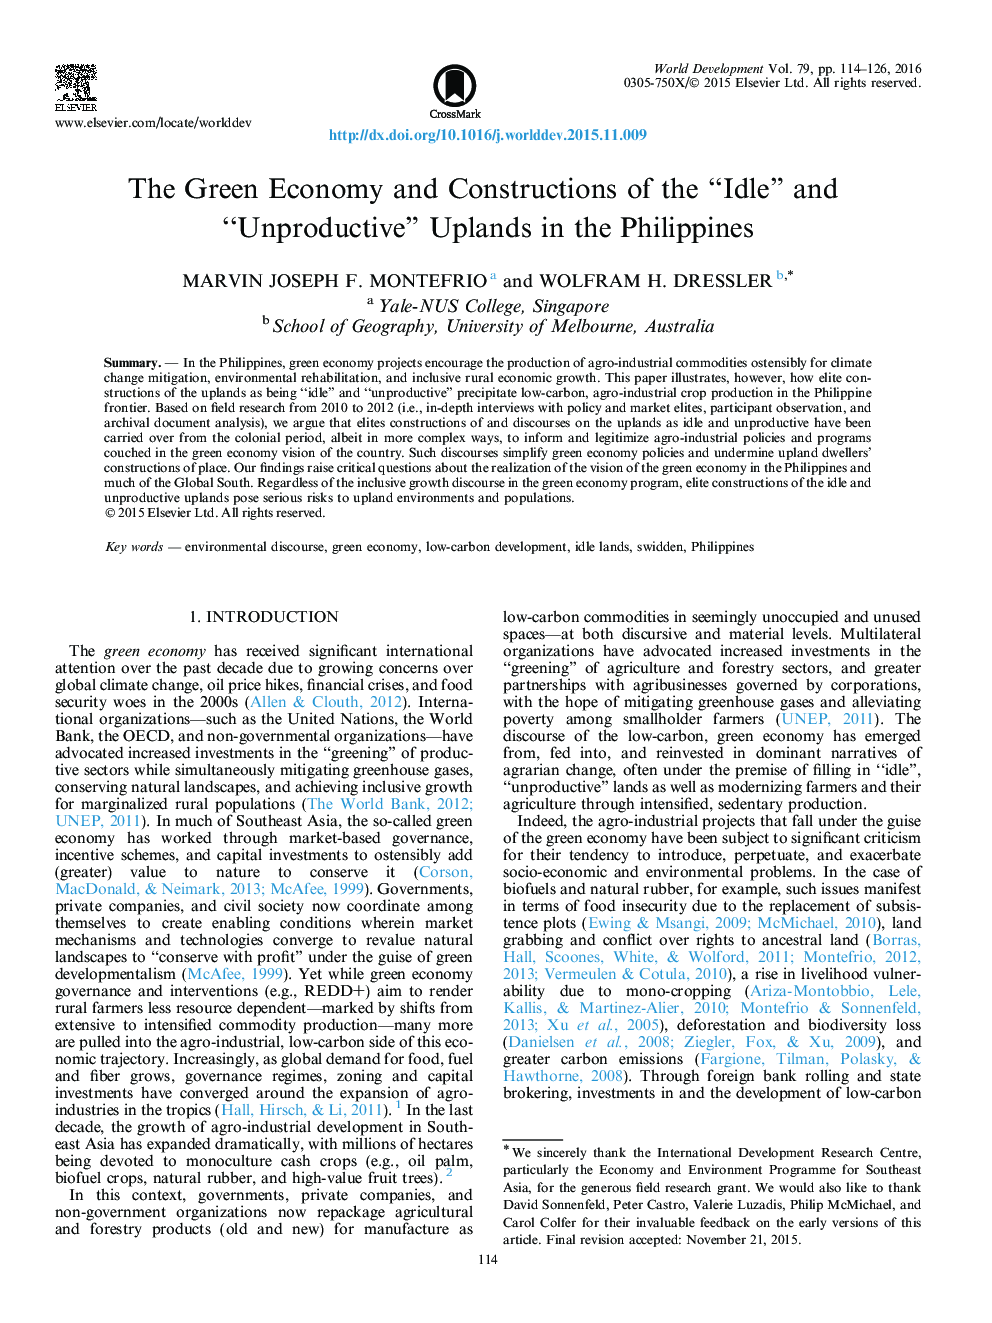 The Green Economy and Constructions of the “Idle” and “Unproductive” Uplands in the Philippines